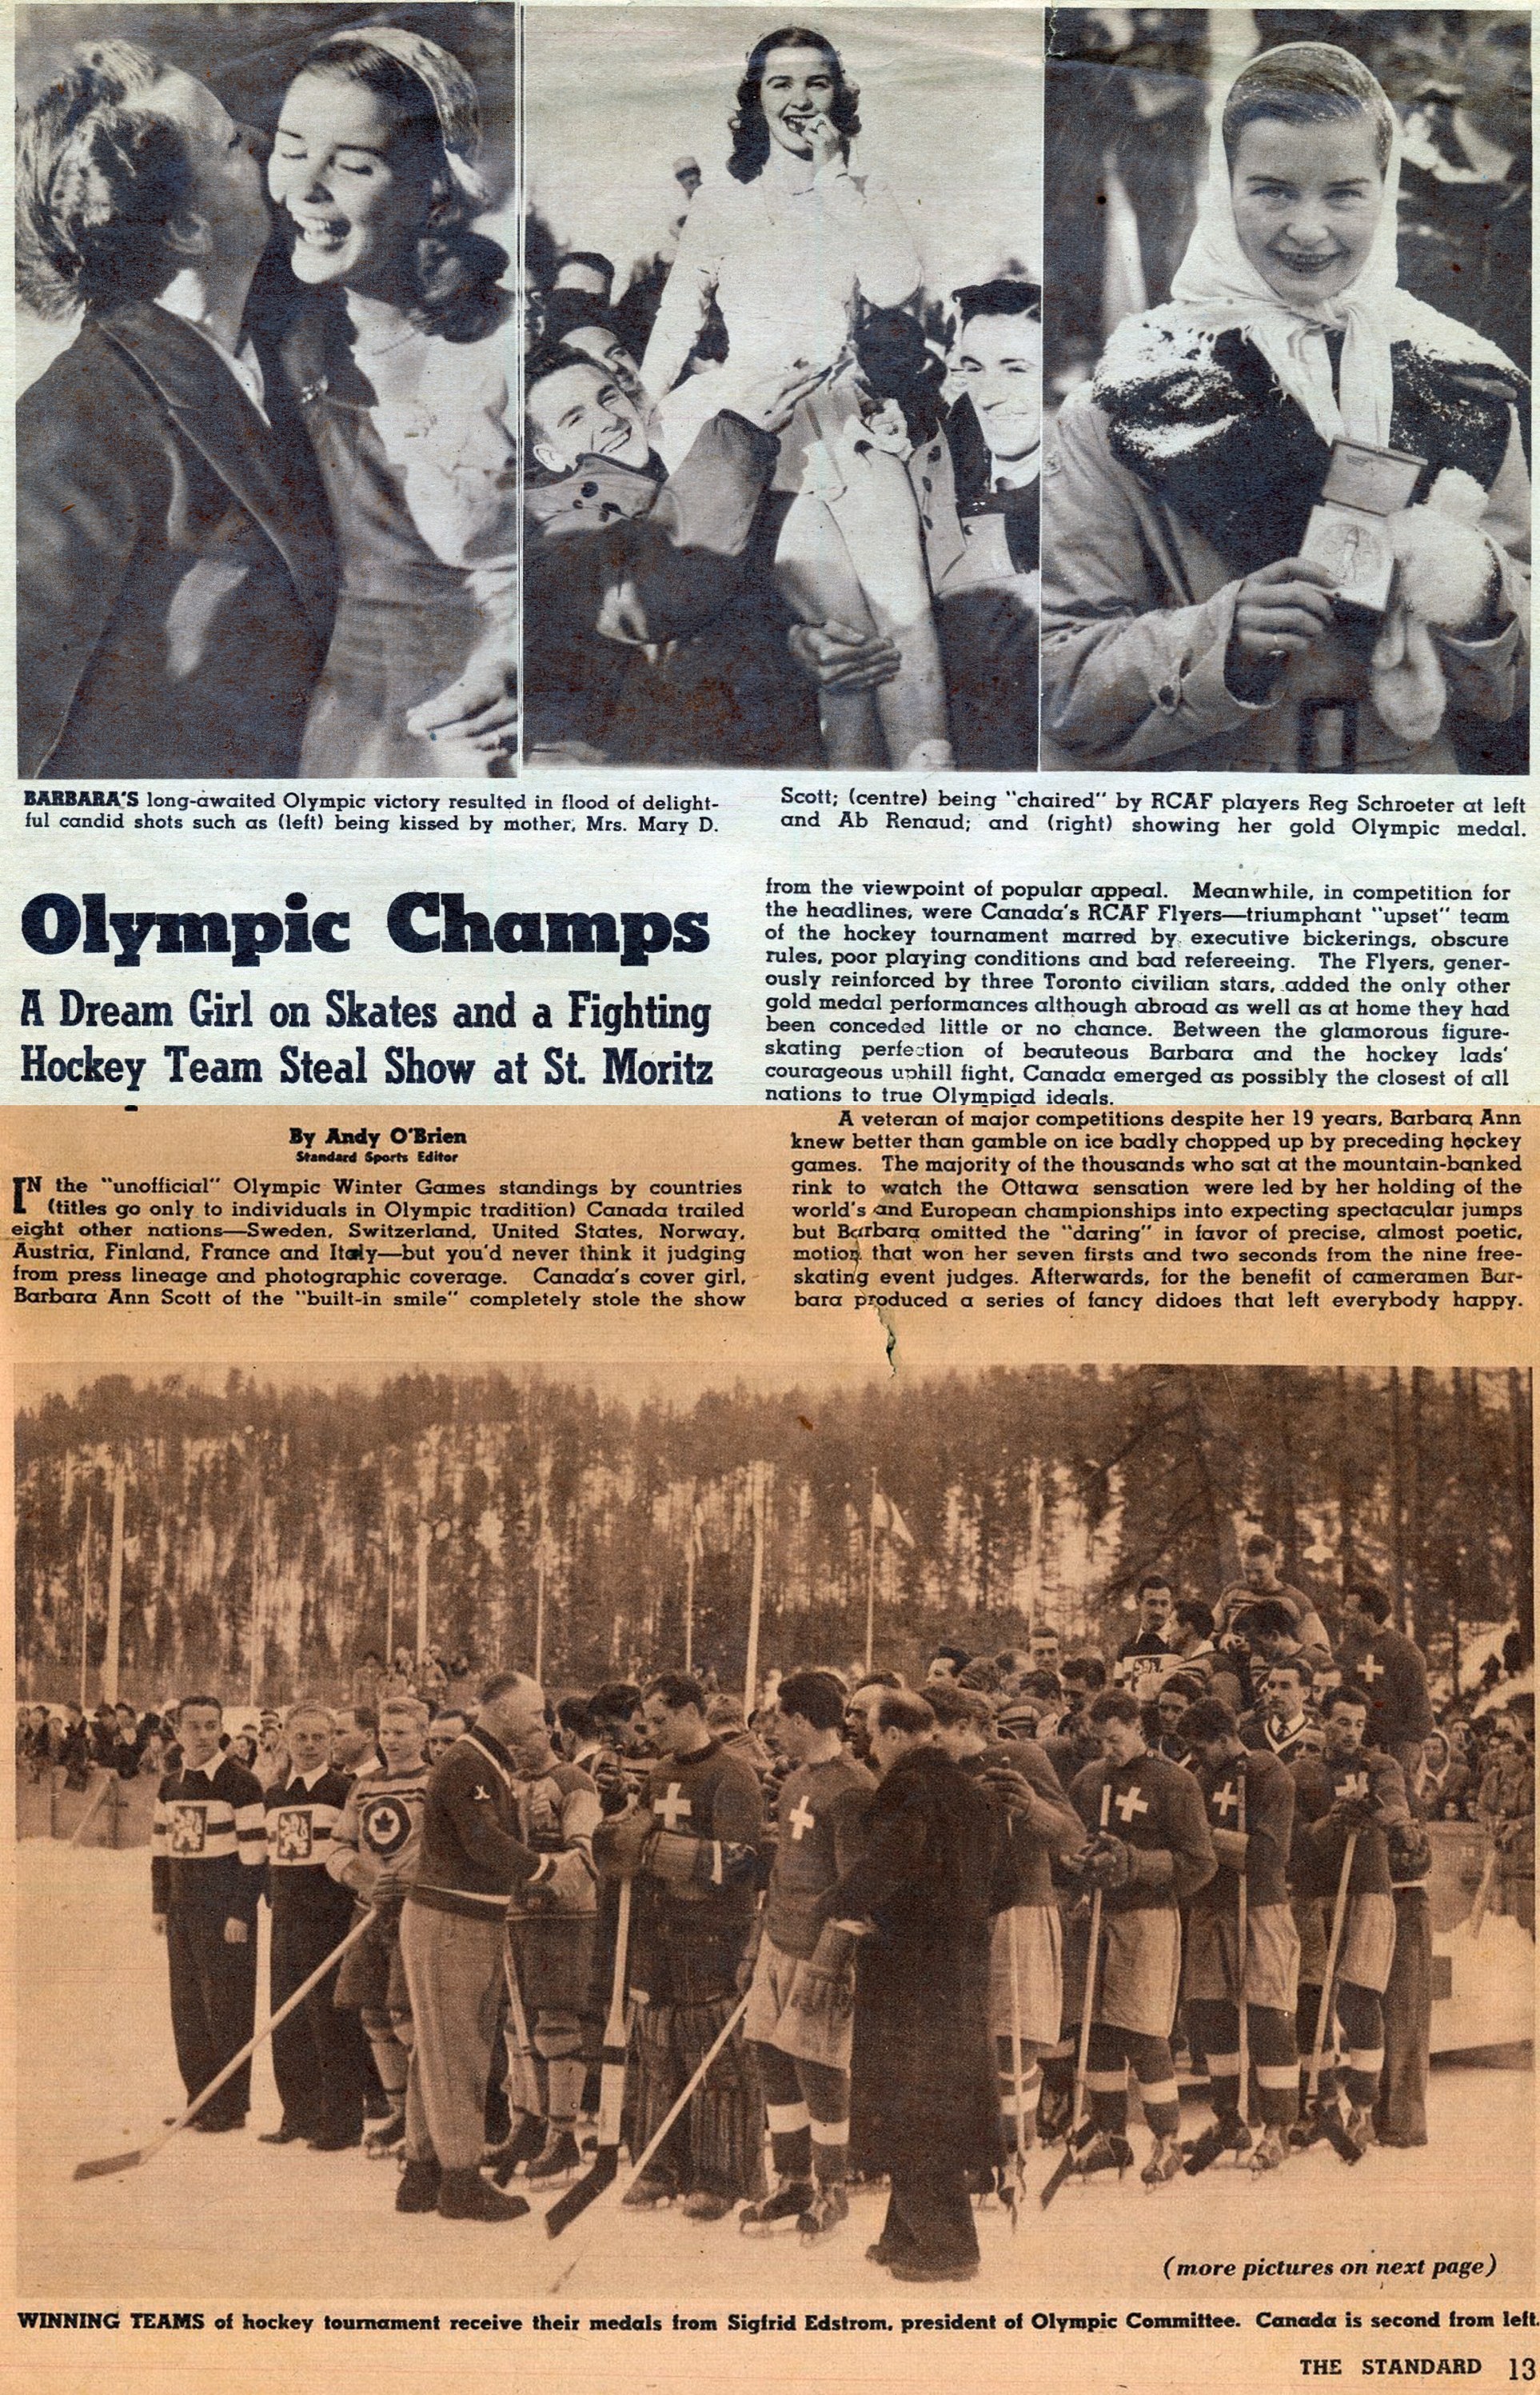 Image: NEWS ARTICLE on Scott and RCAF Flyers as Olympic Champs